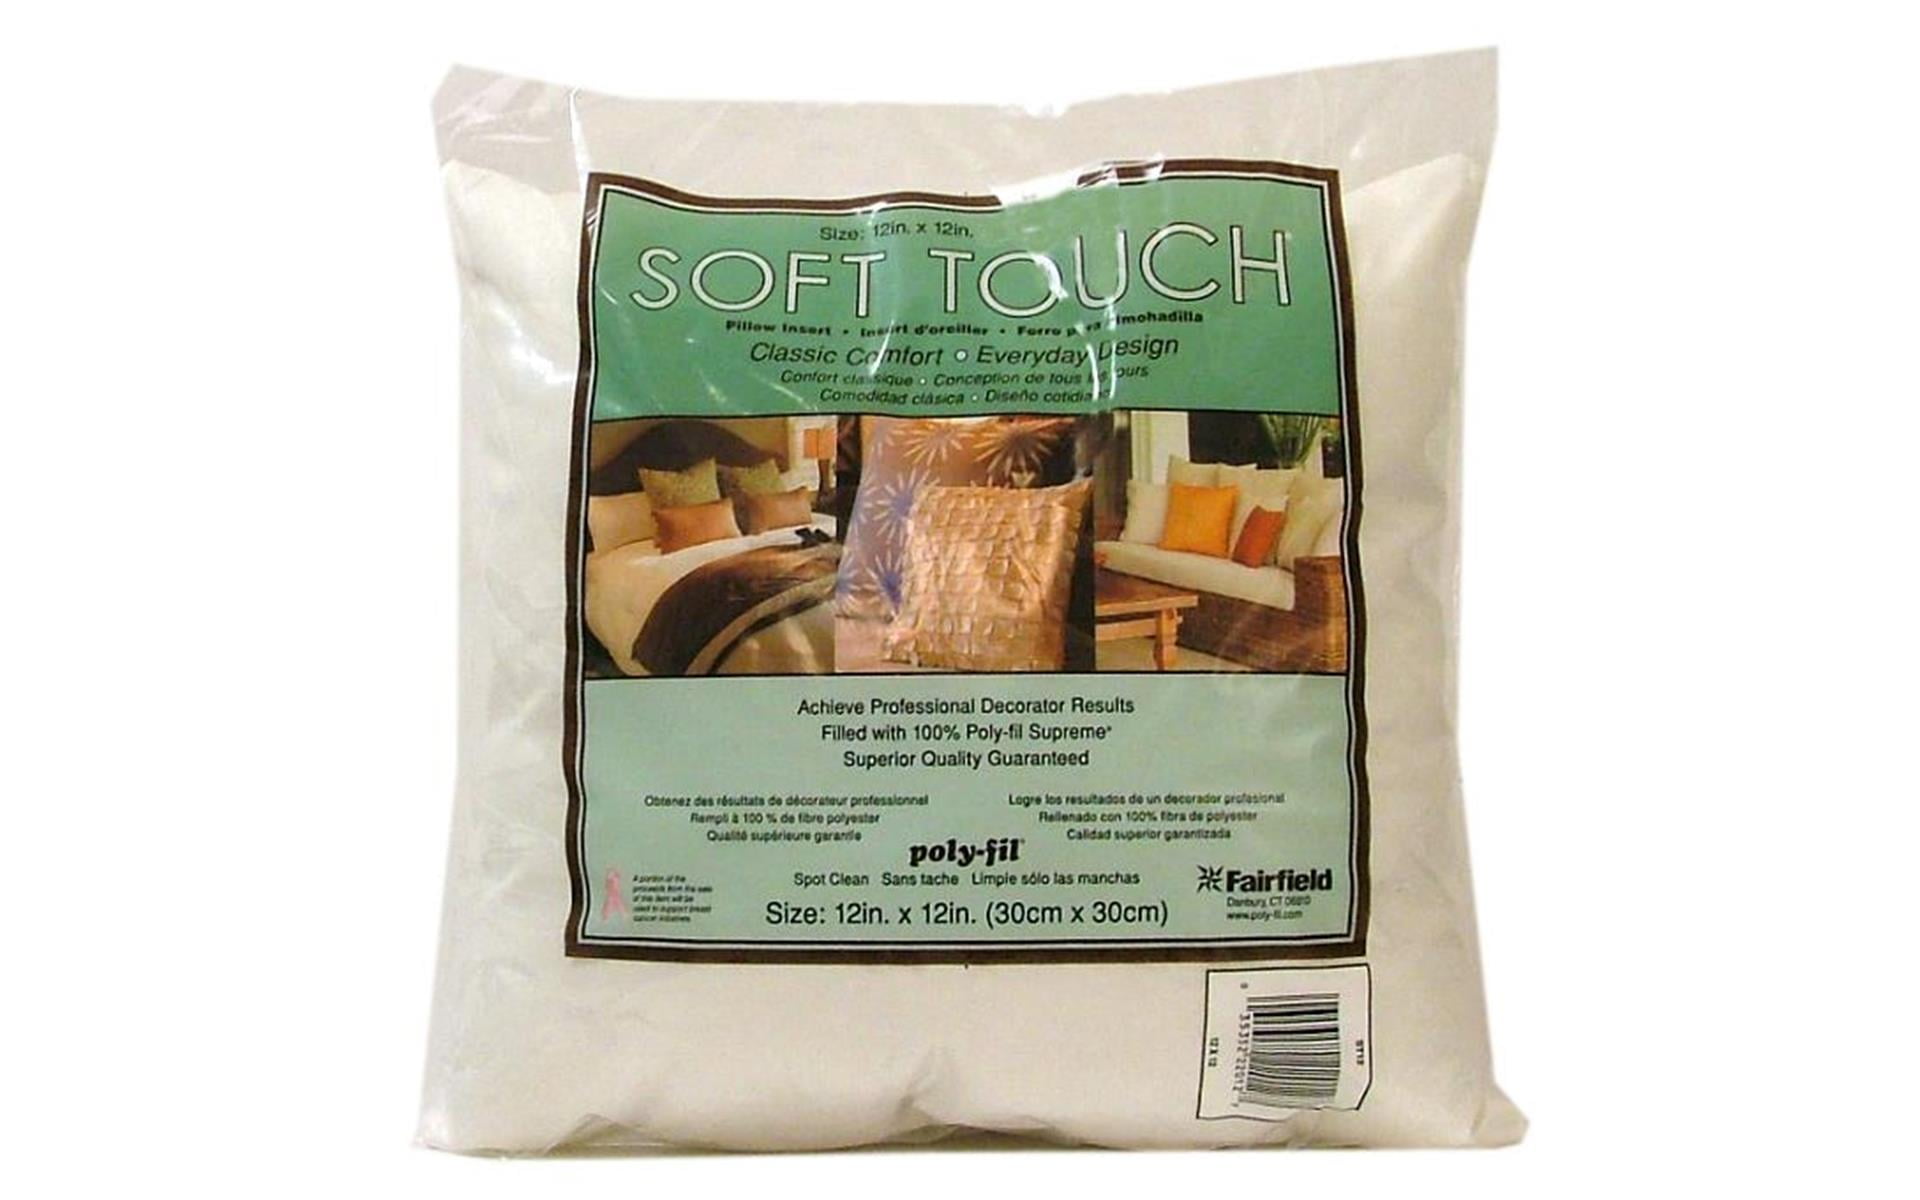 Soft Touch PolyFIL 12 x 16 Pillow Form - WoolyLady